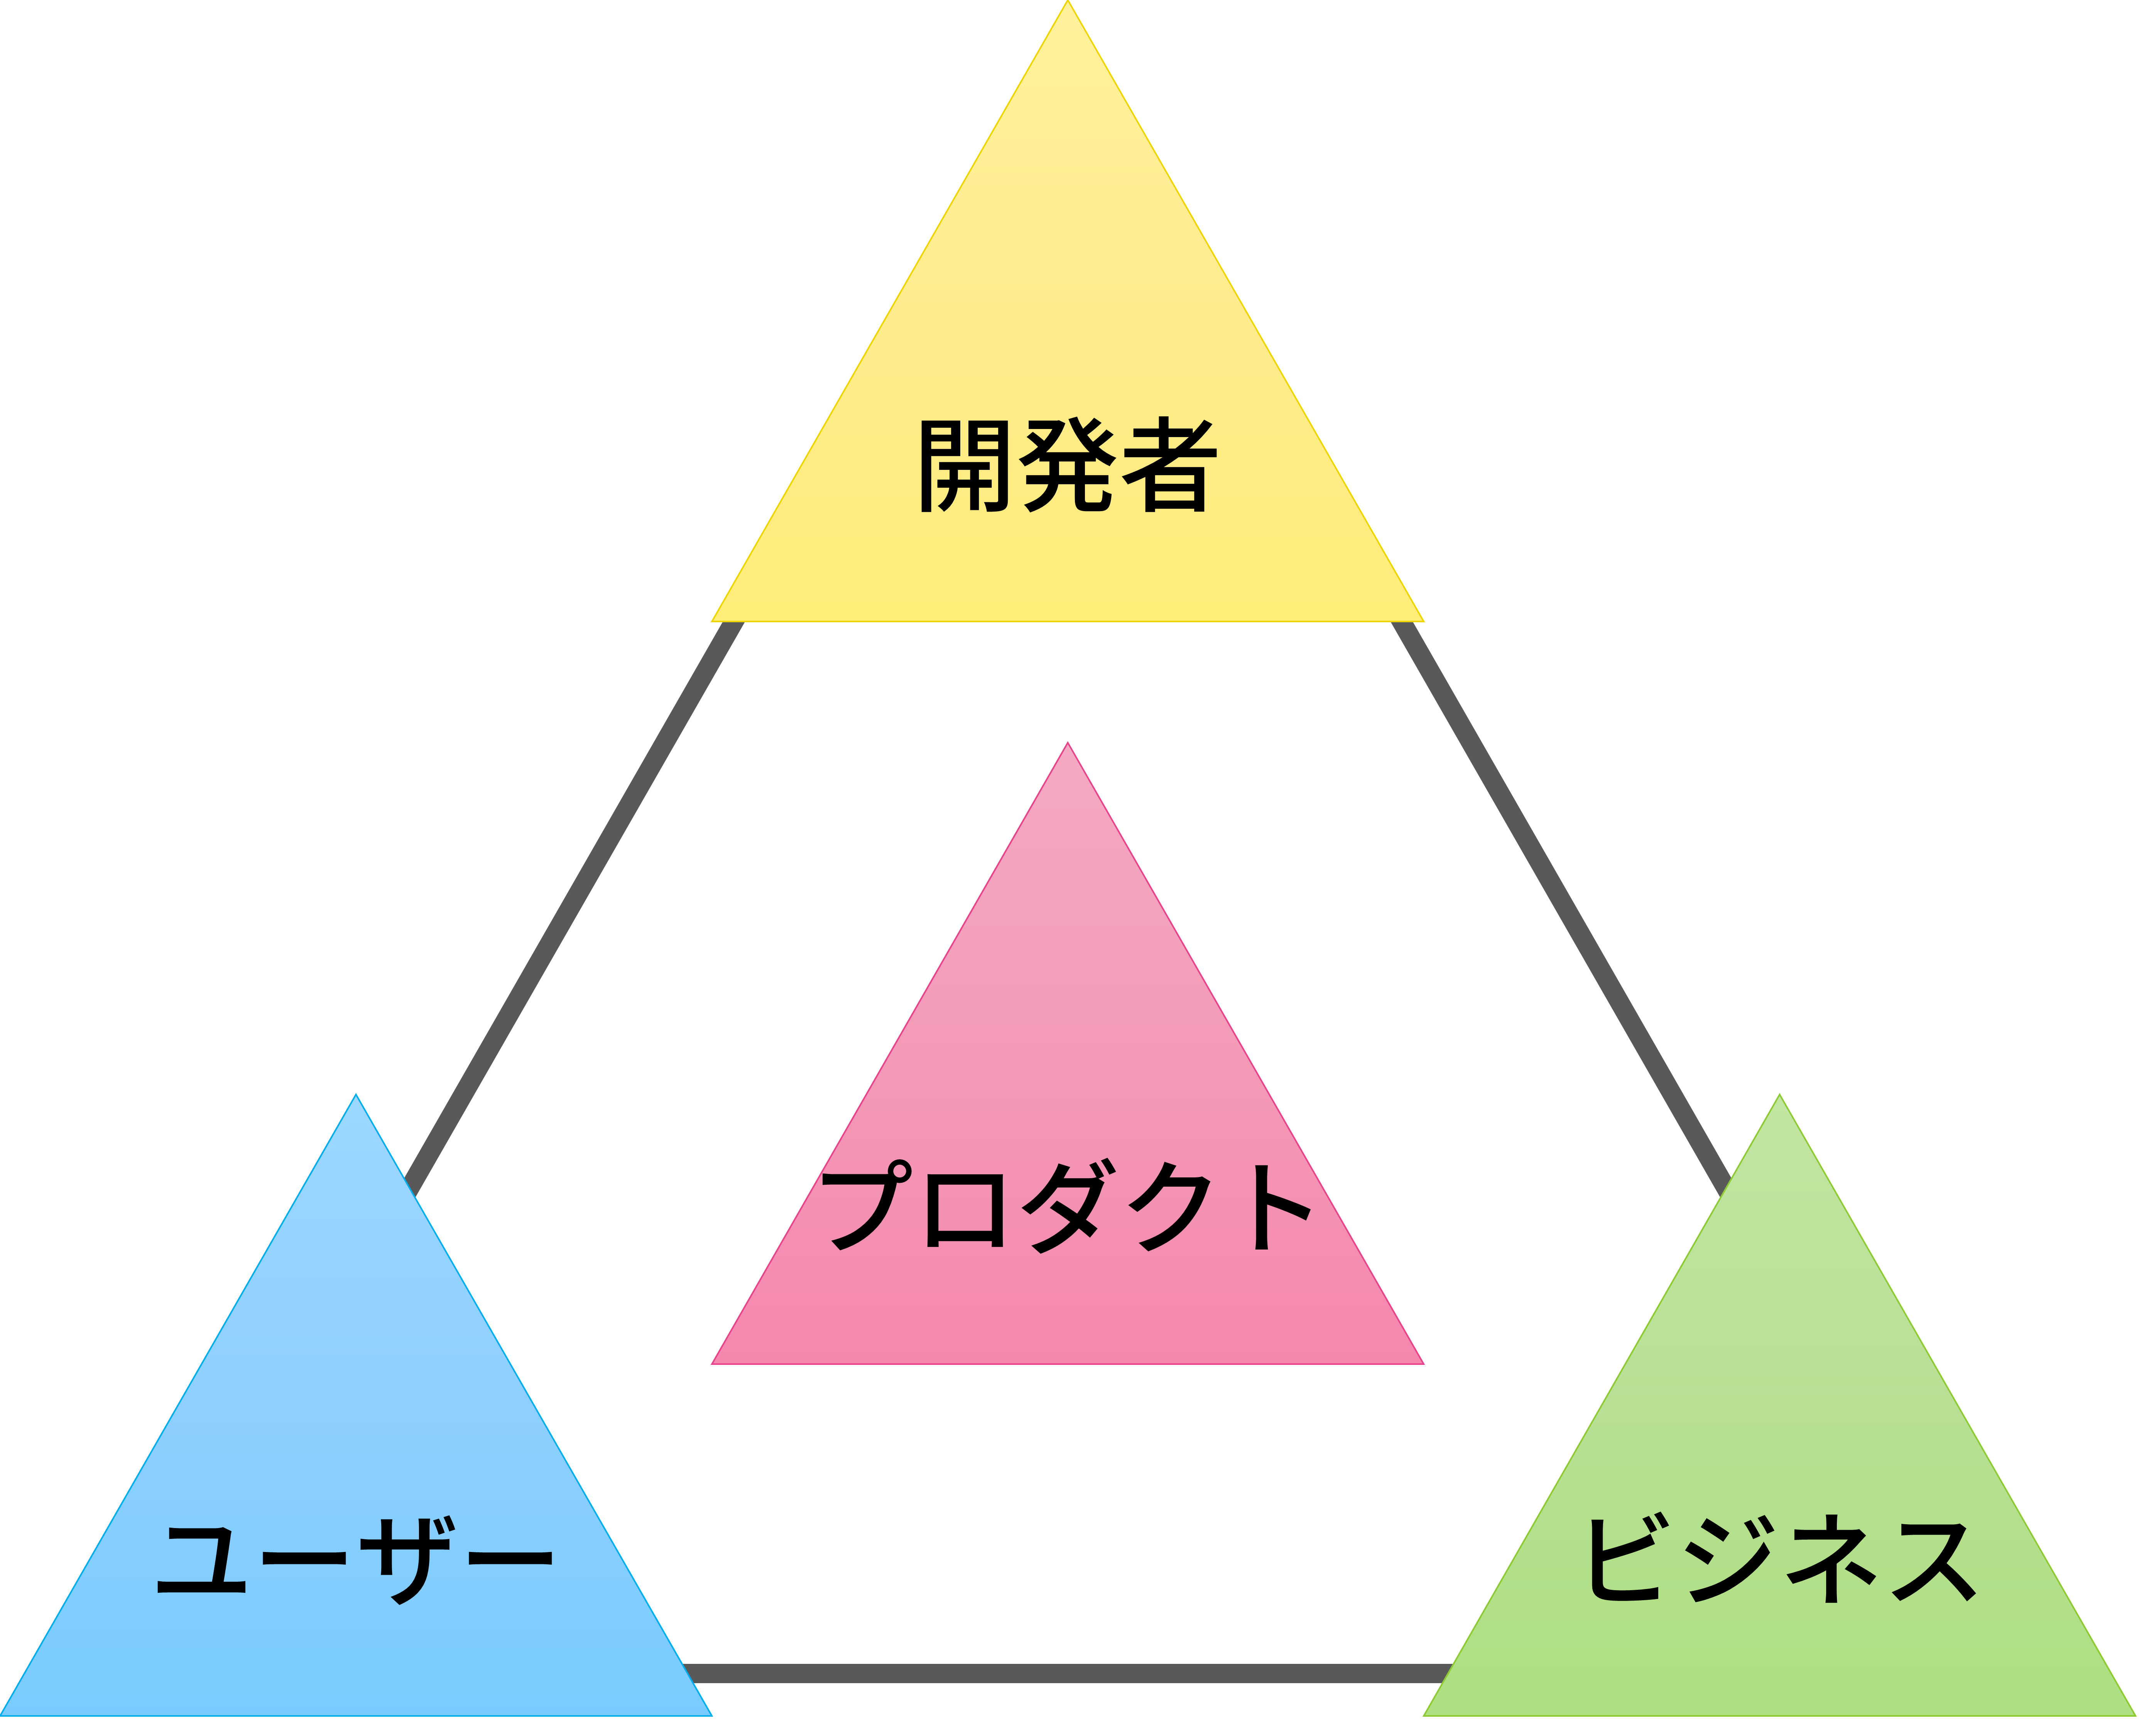 "Product Management Triangle"